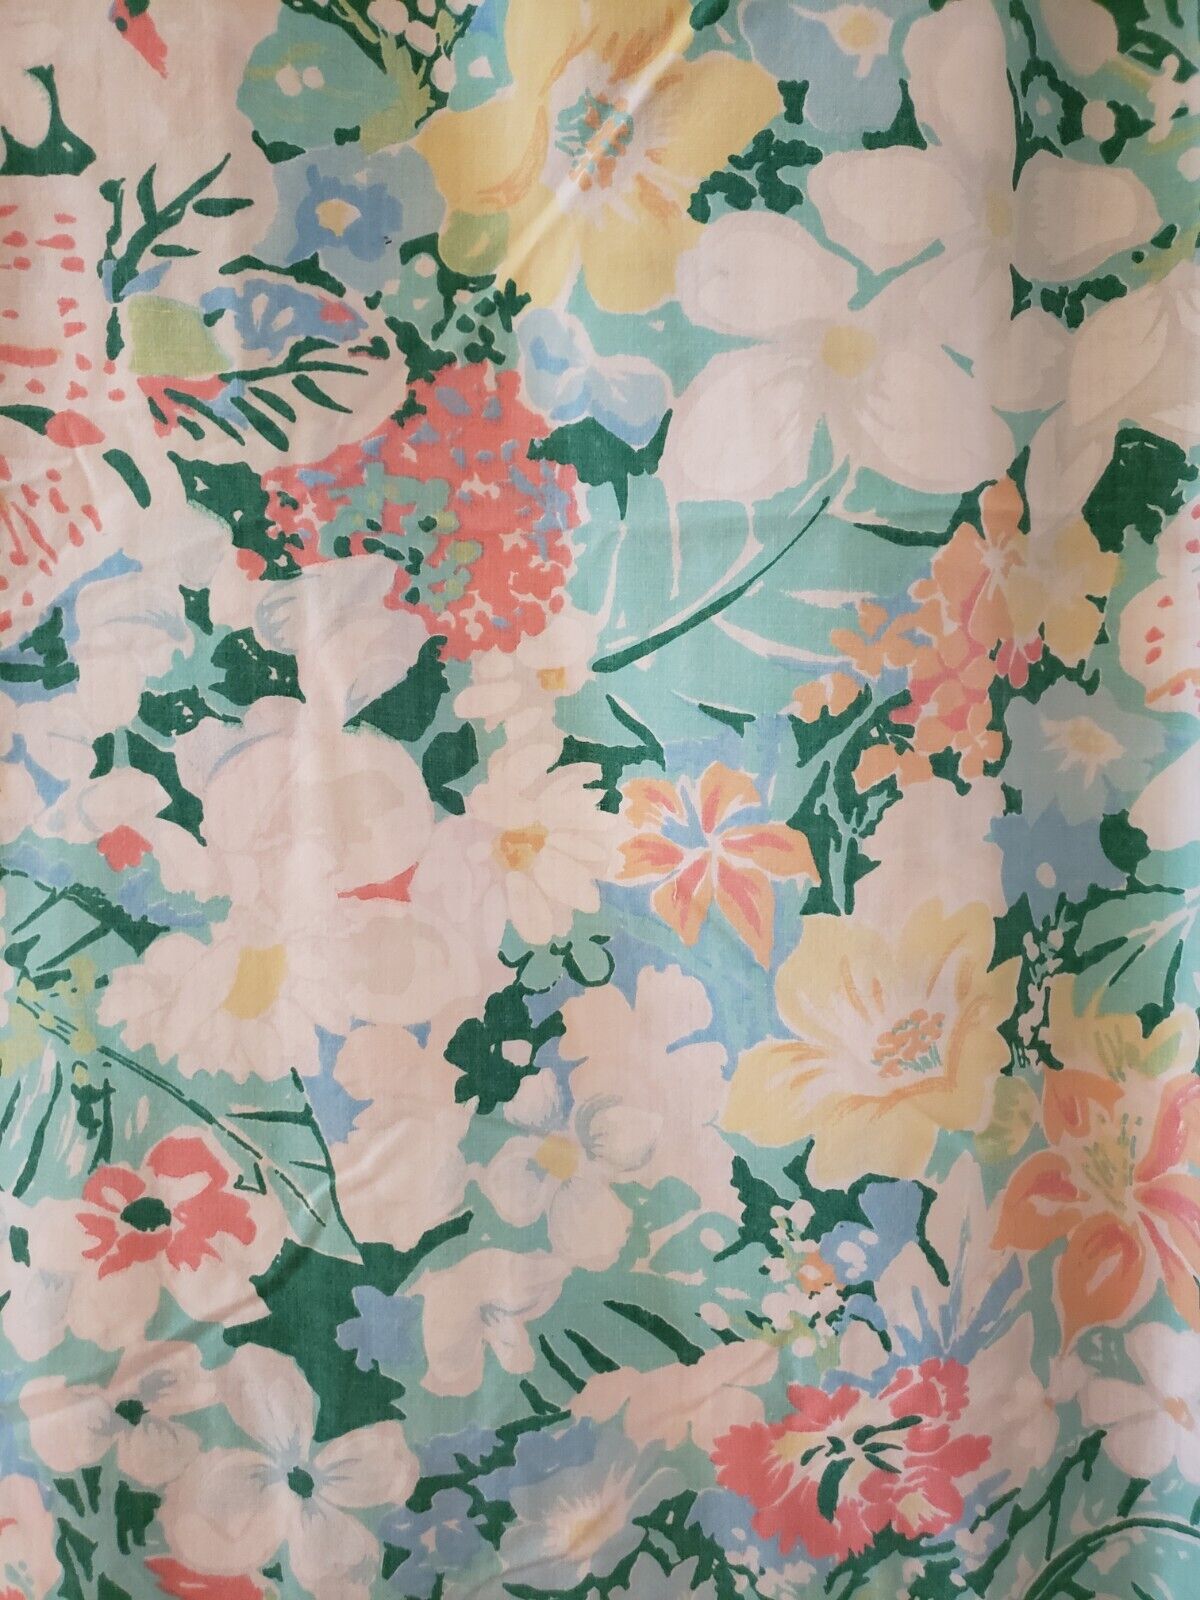 Vintage Mod Floral Flat Sheet Pink Green Blue Lily 70s Retro FULL? ~80x88